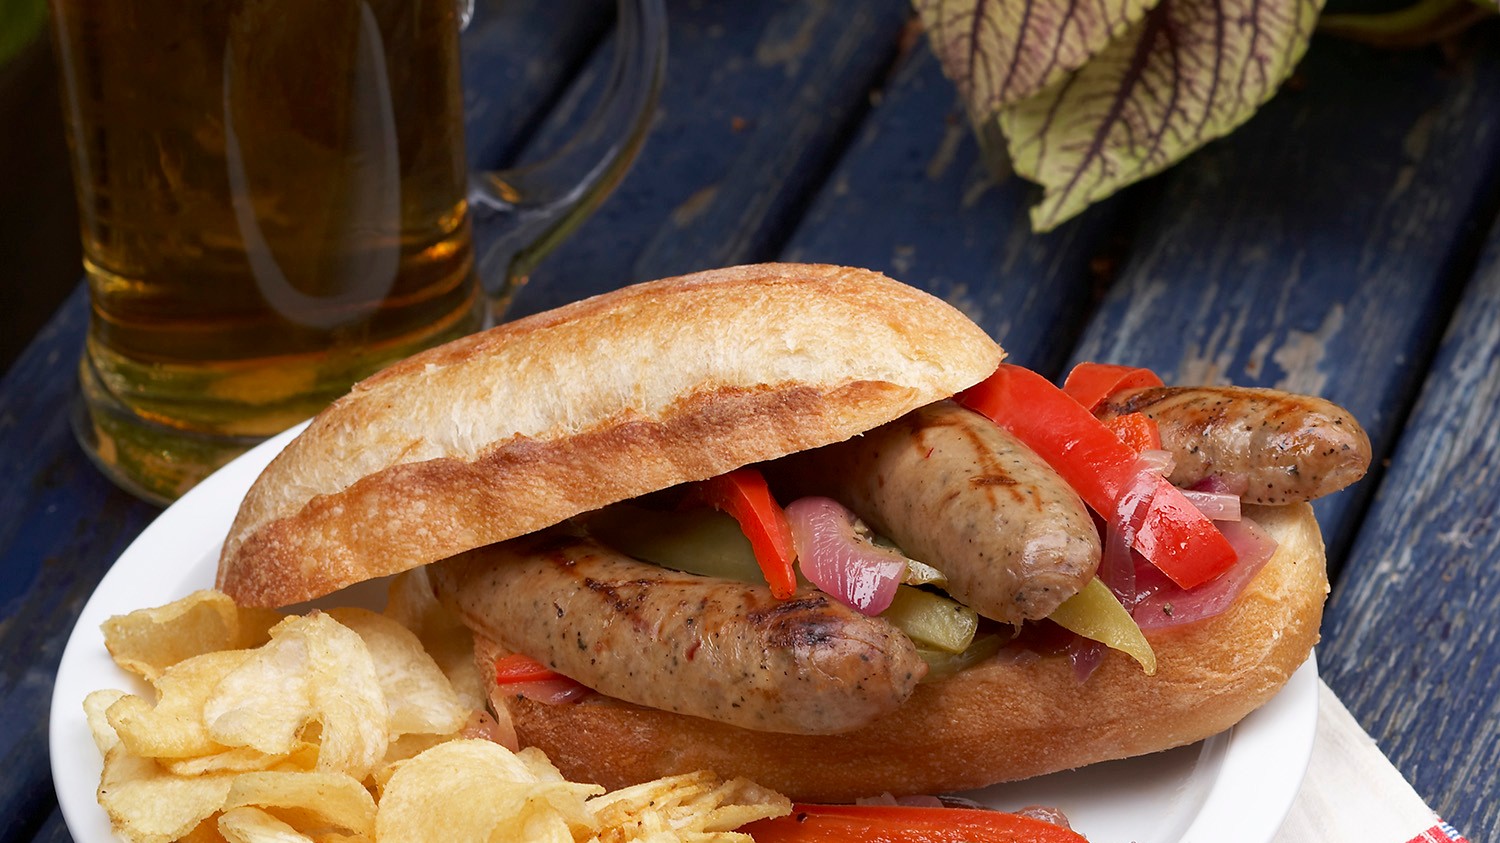 Image of Sausage with Peppers and Onions